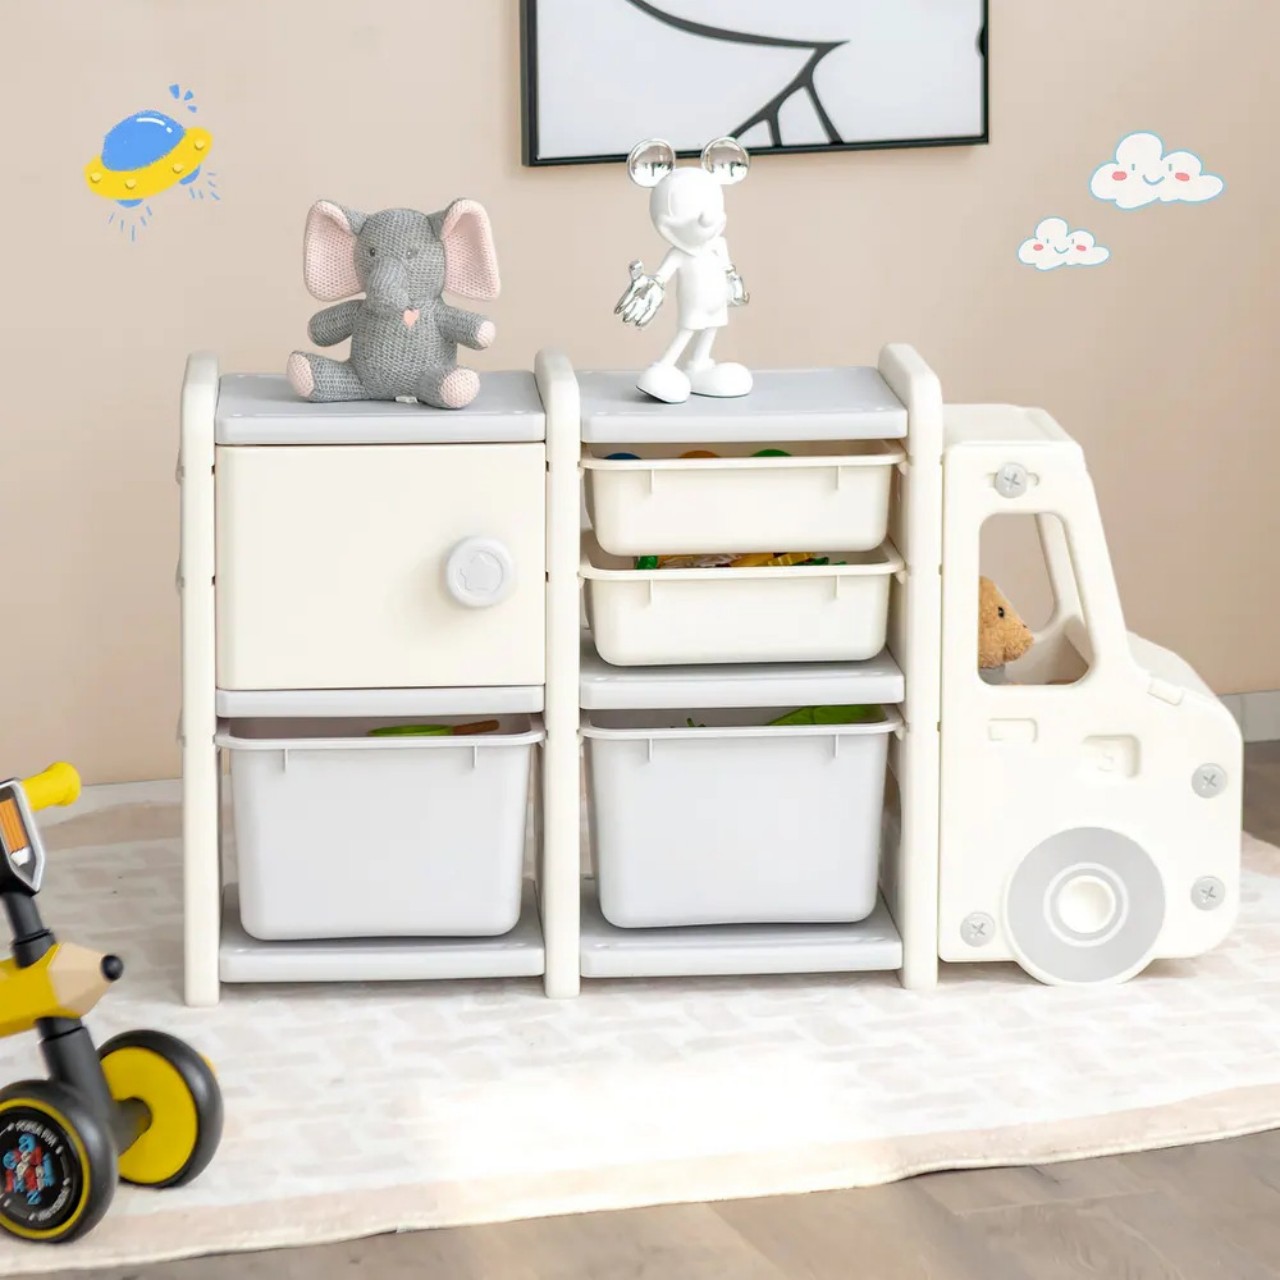 How to Organize Toys: 25 Ideas for a Safe Home and a Stress-free ...